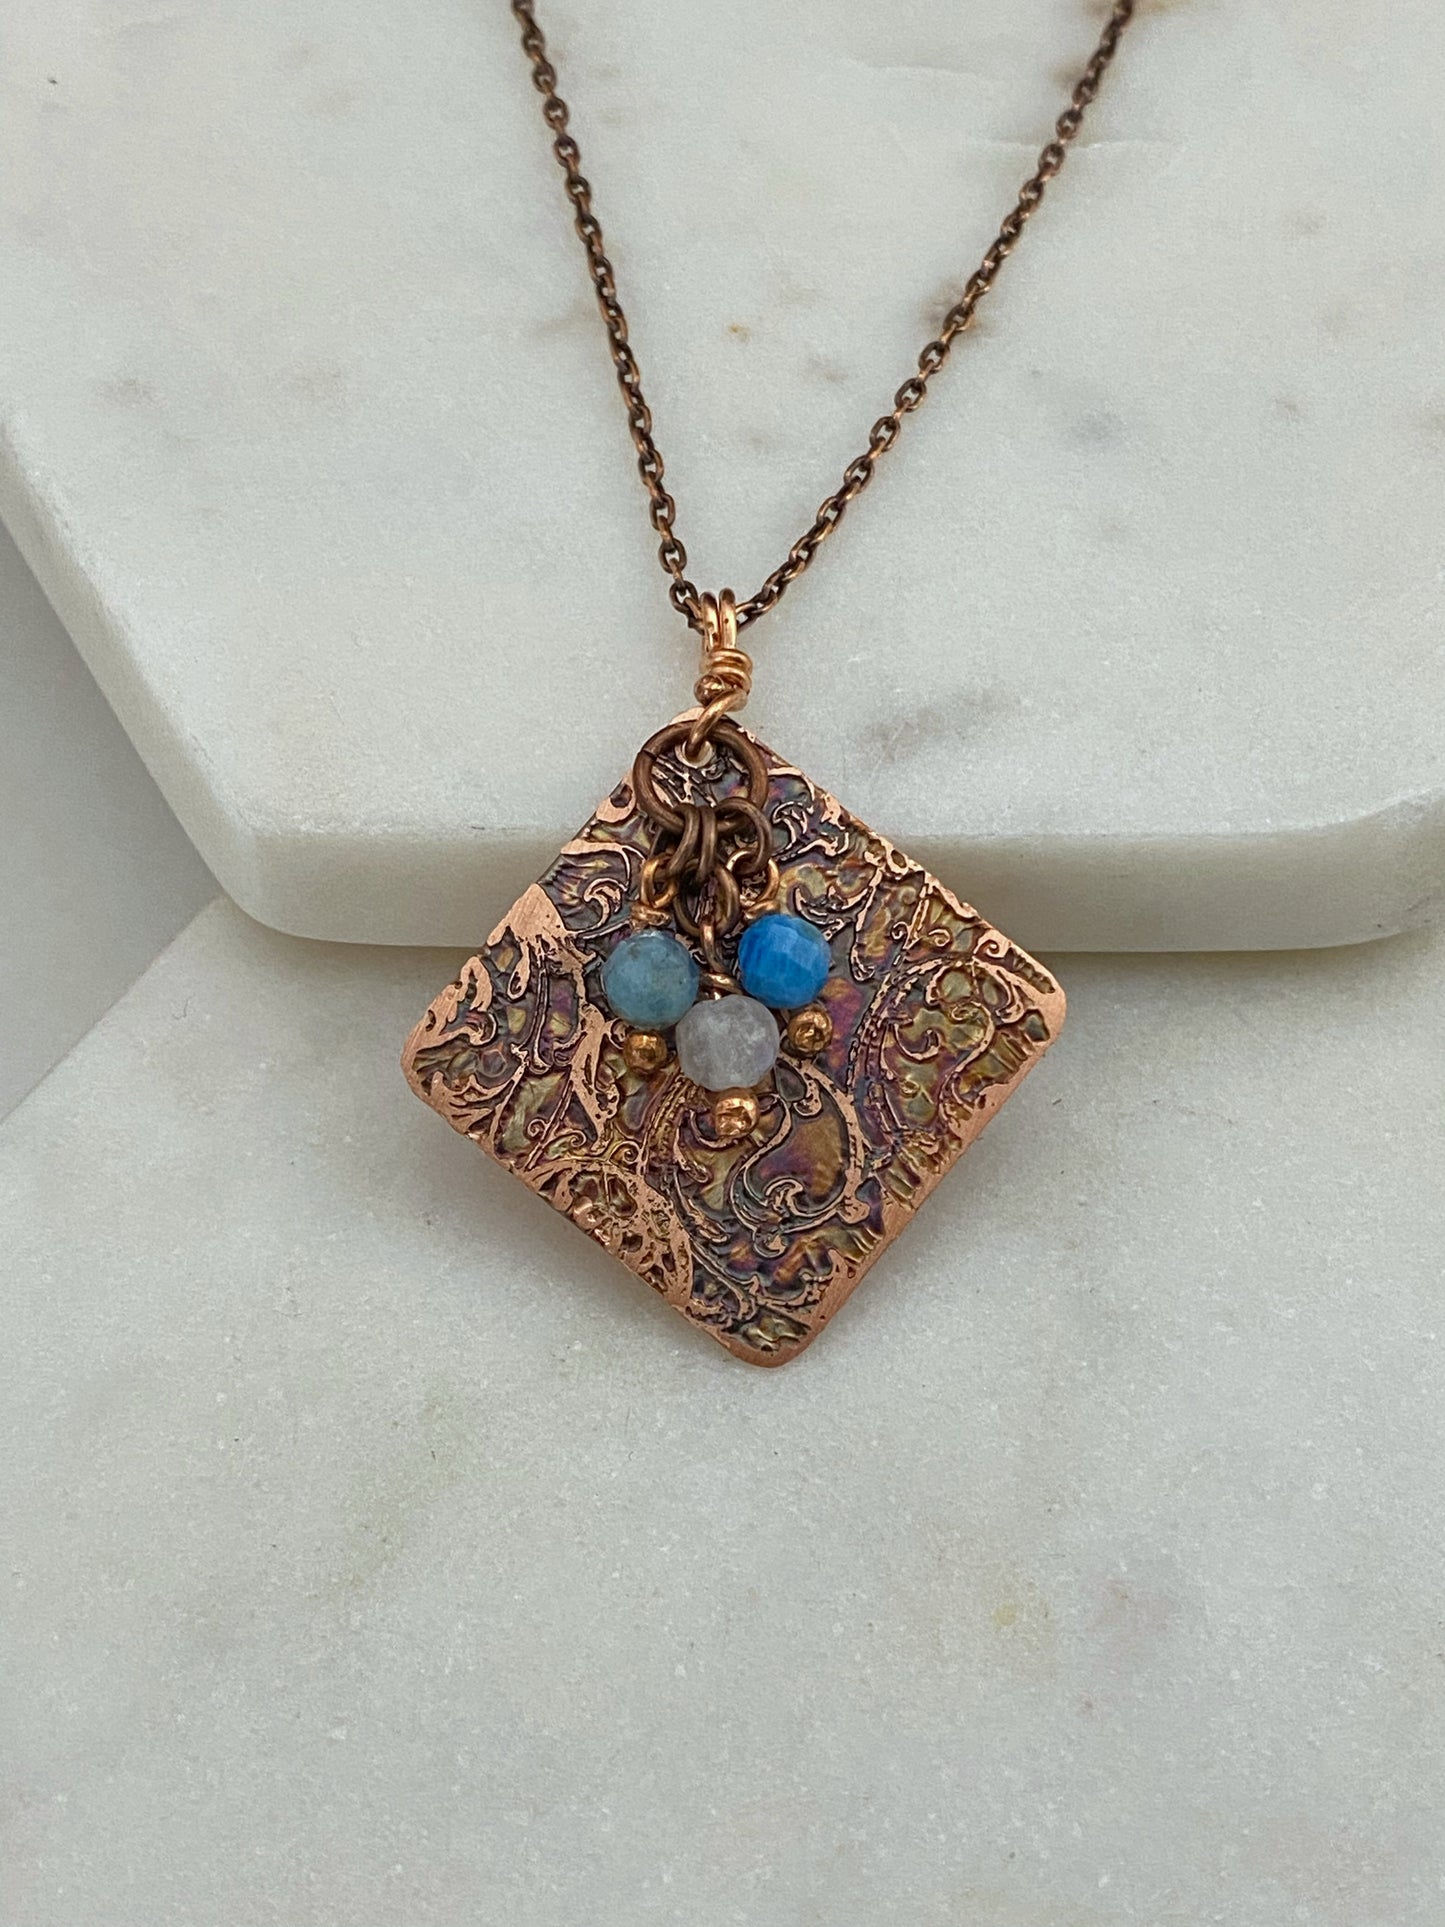 Acid etched copper necklace with moonstone and apatite gemstone